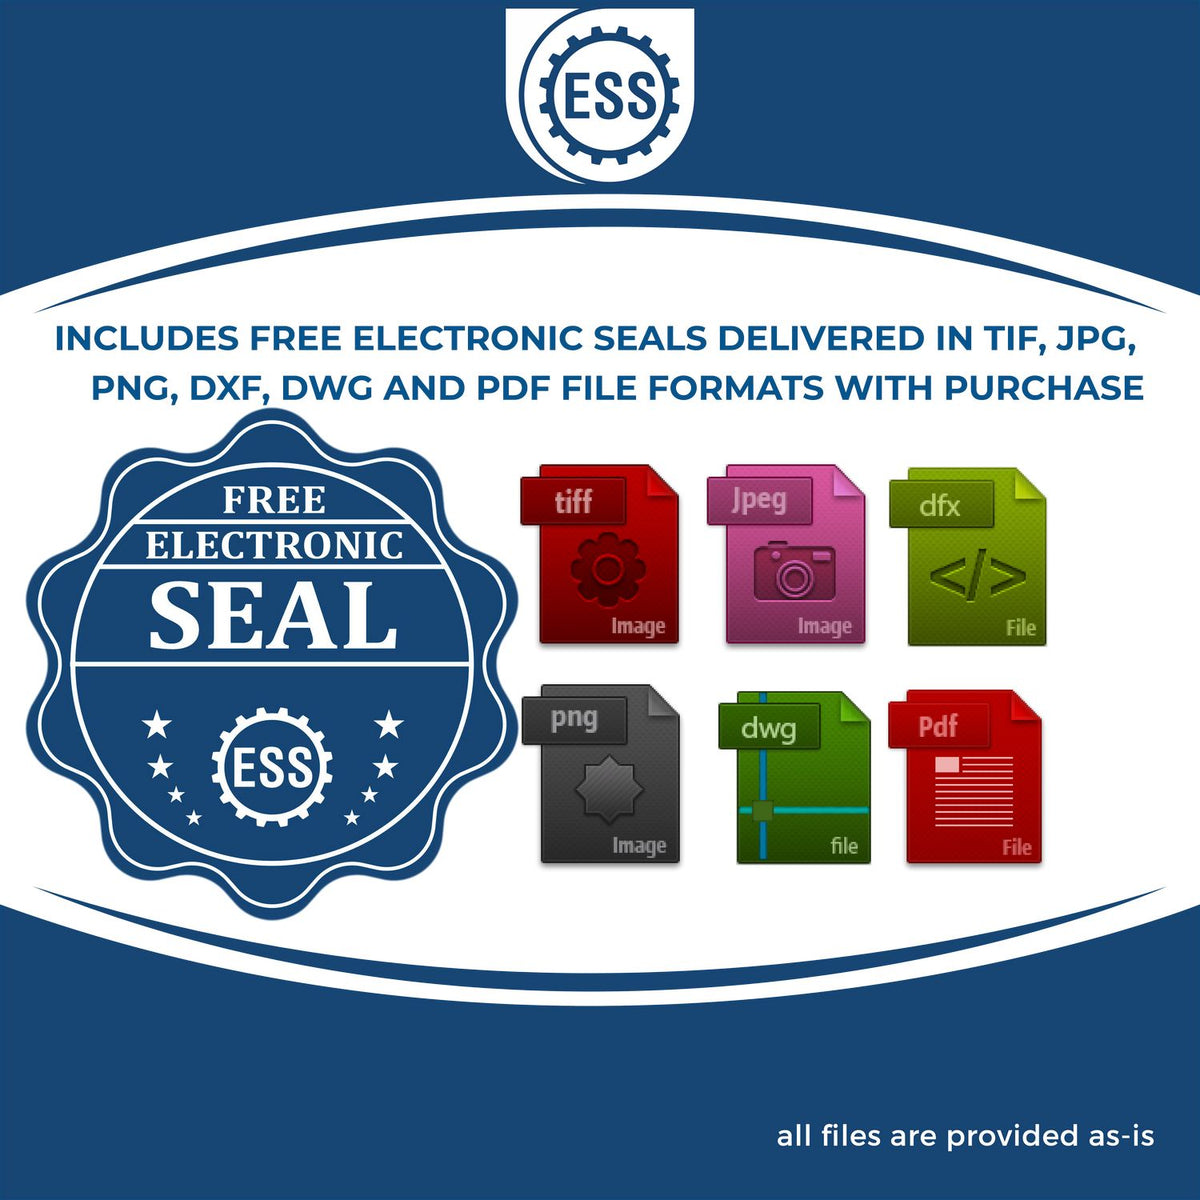 An infographic for the free electronic seal for the Kansas Geologist Desk Seal illustrating the different file type icons such as DXF, DWG, TIF, JPG and PNG.